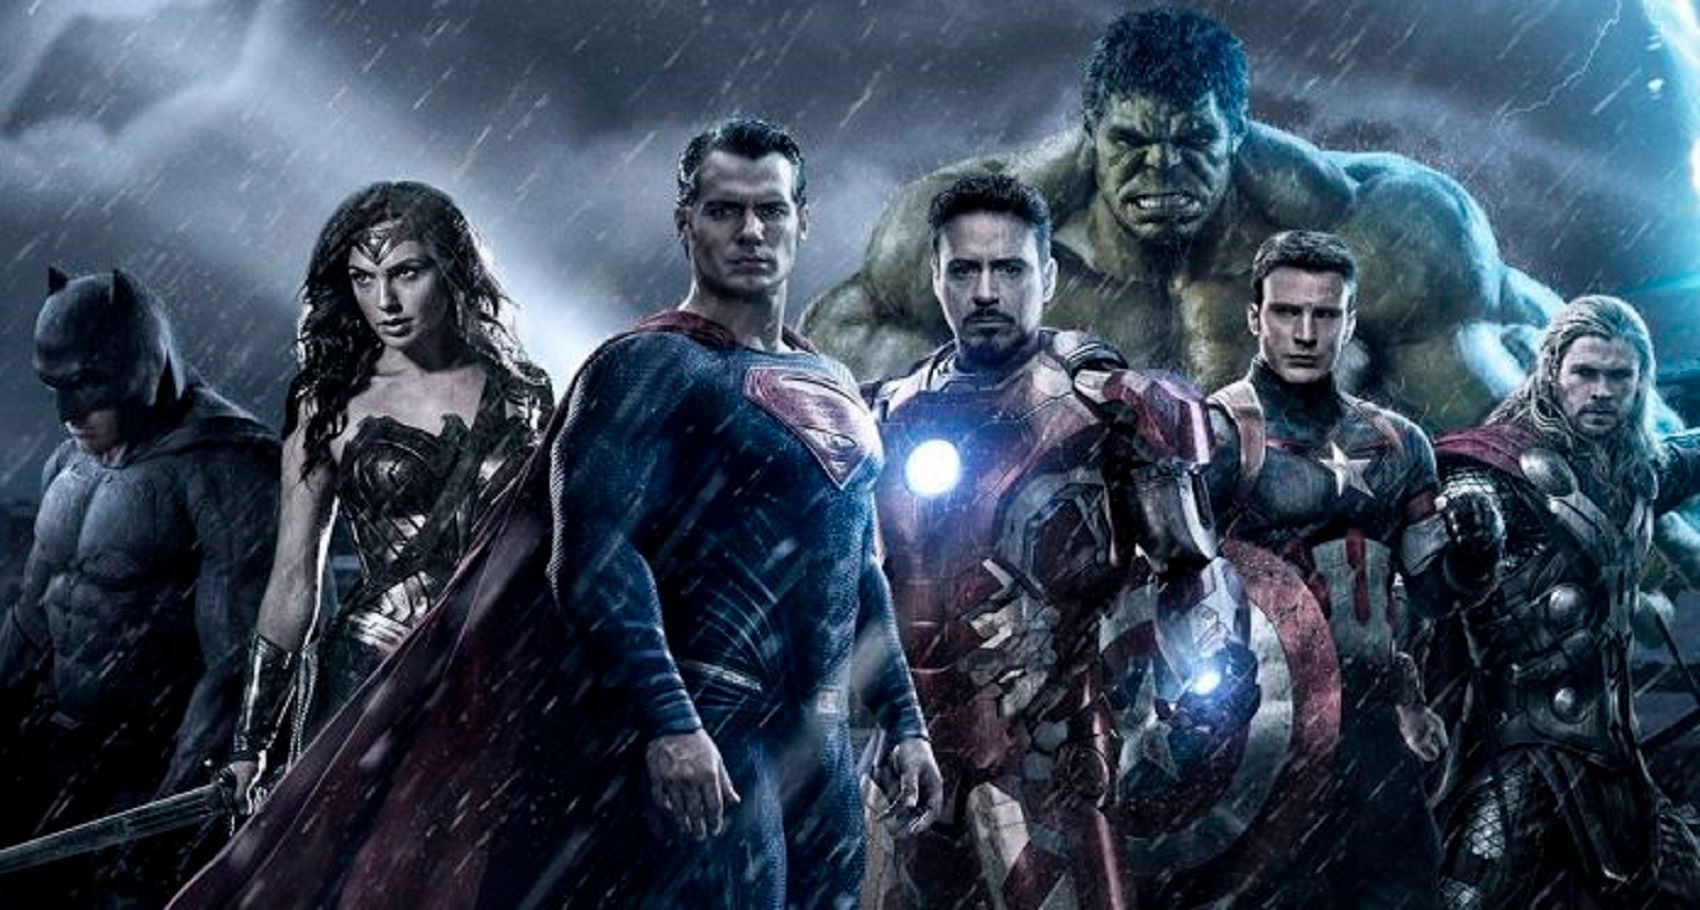 Avengers Vs Justice League: Who Would Really Win?